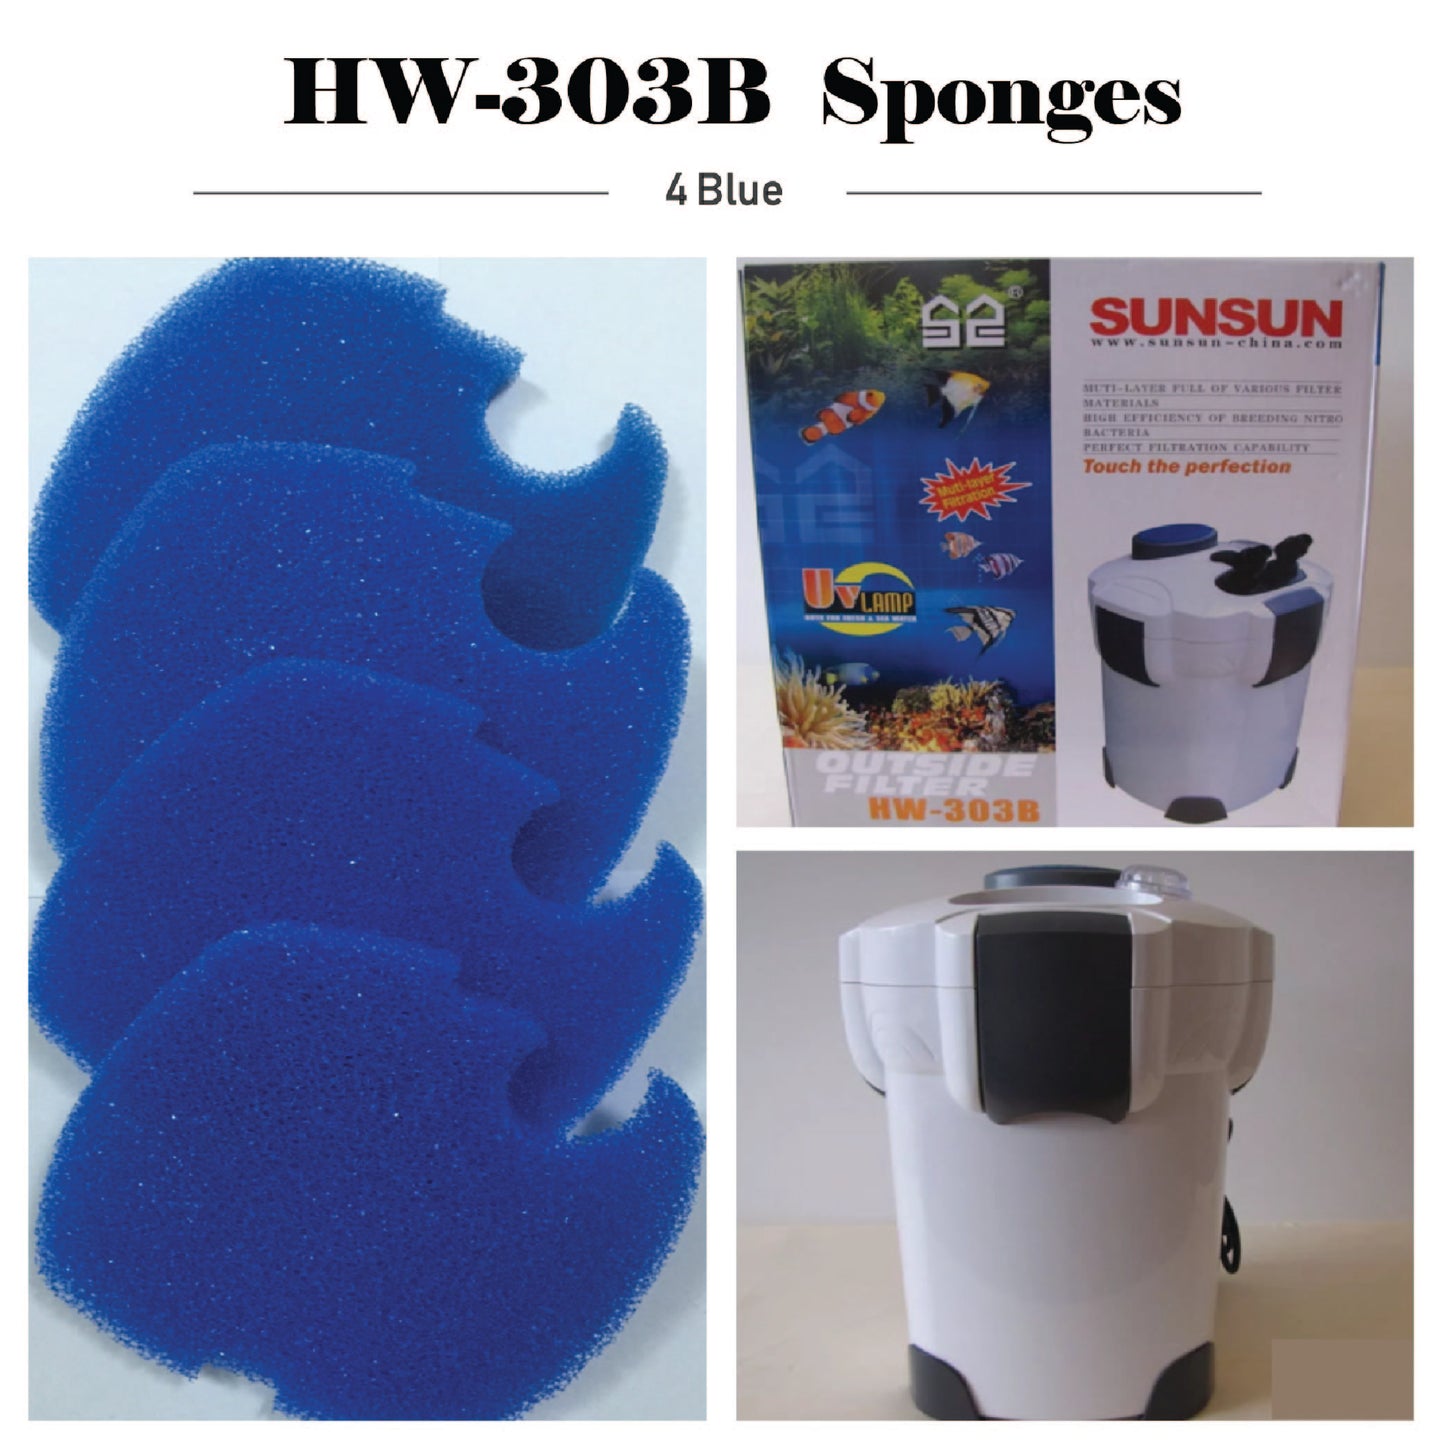 SUNSUN 4PCS genuine replacement sponge pad for all brand with the model number XXX-303